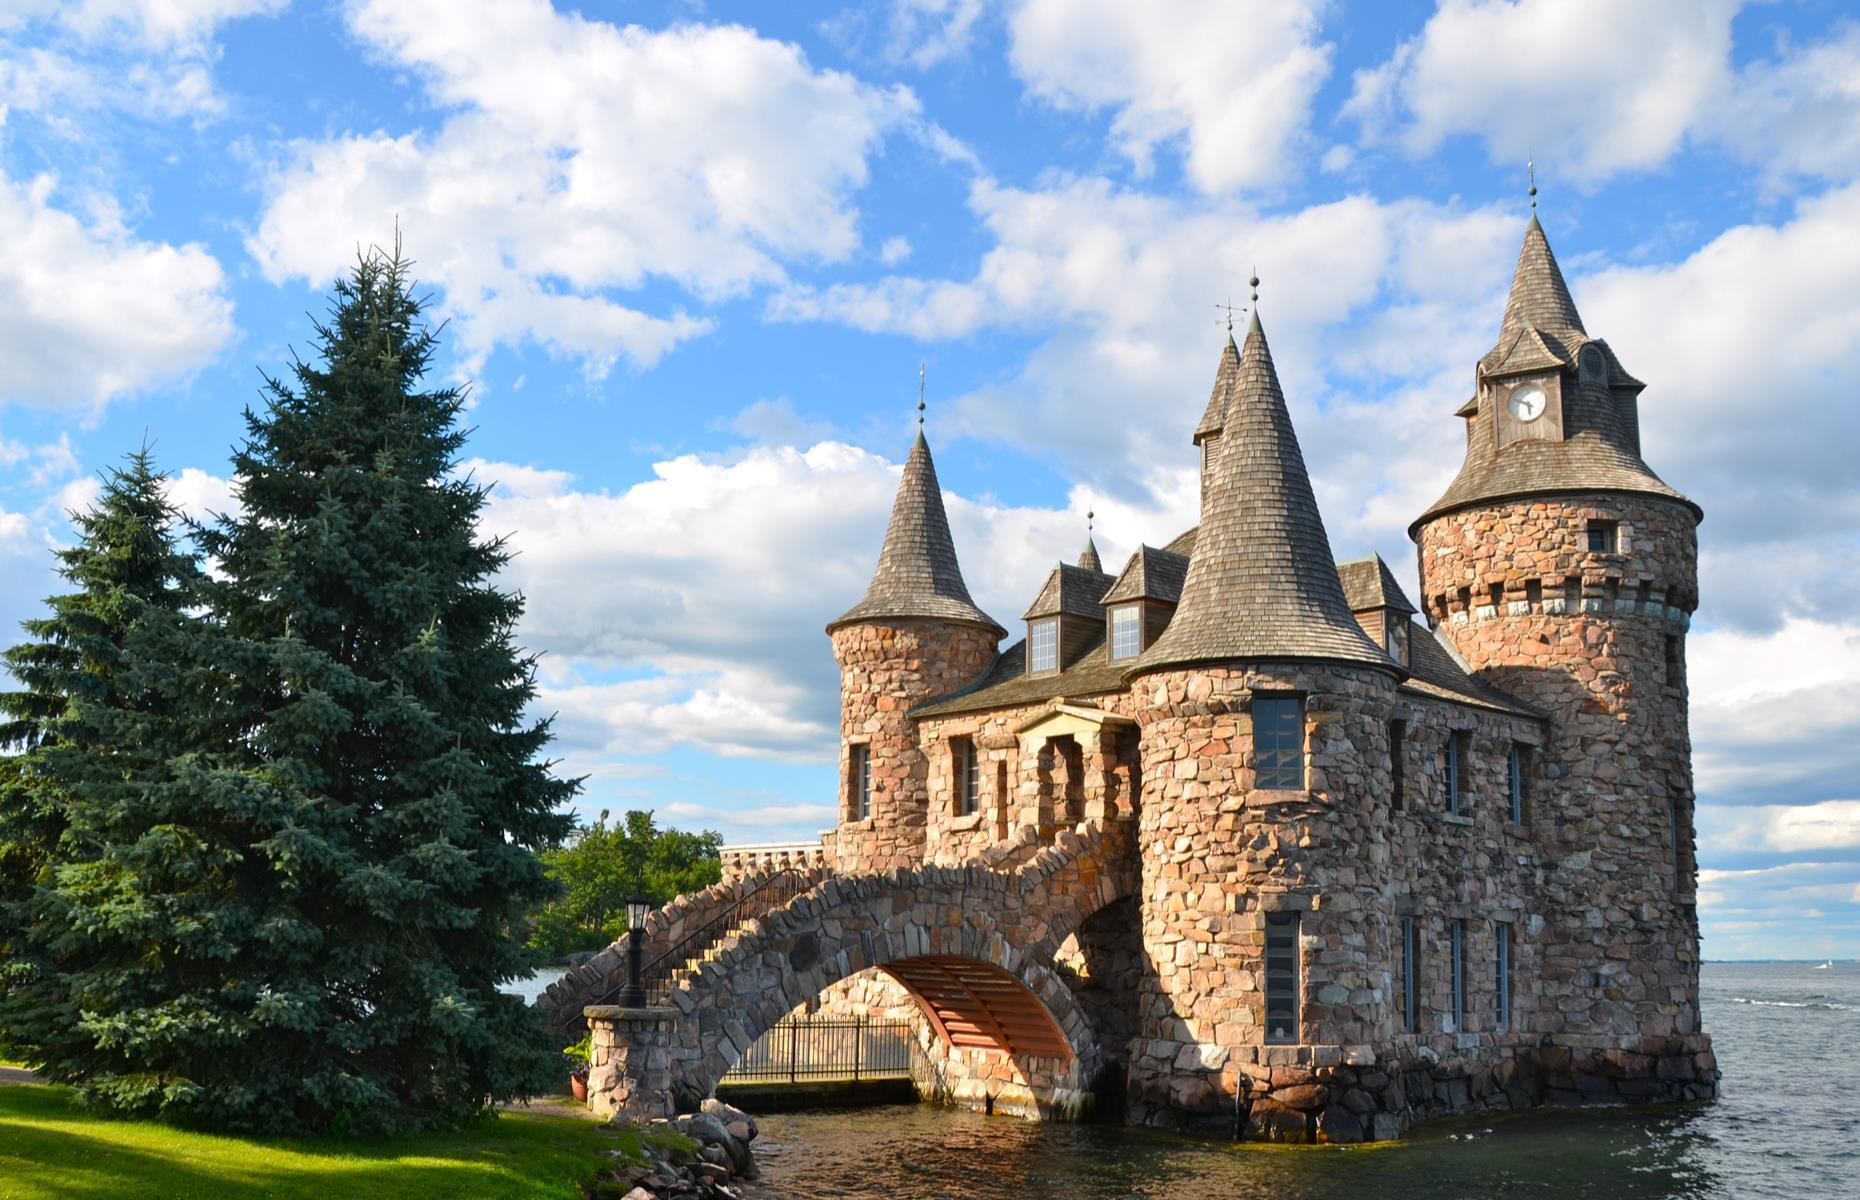 Most castles with towers and turrets exist in Europe, but there are fairy-tale fortresses in the United States too. Although they're not always the real deal, they often take inspiration from majestic piles across the pond. Here's our pick of America's historic castles you might not know about...